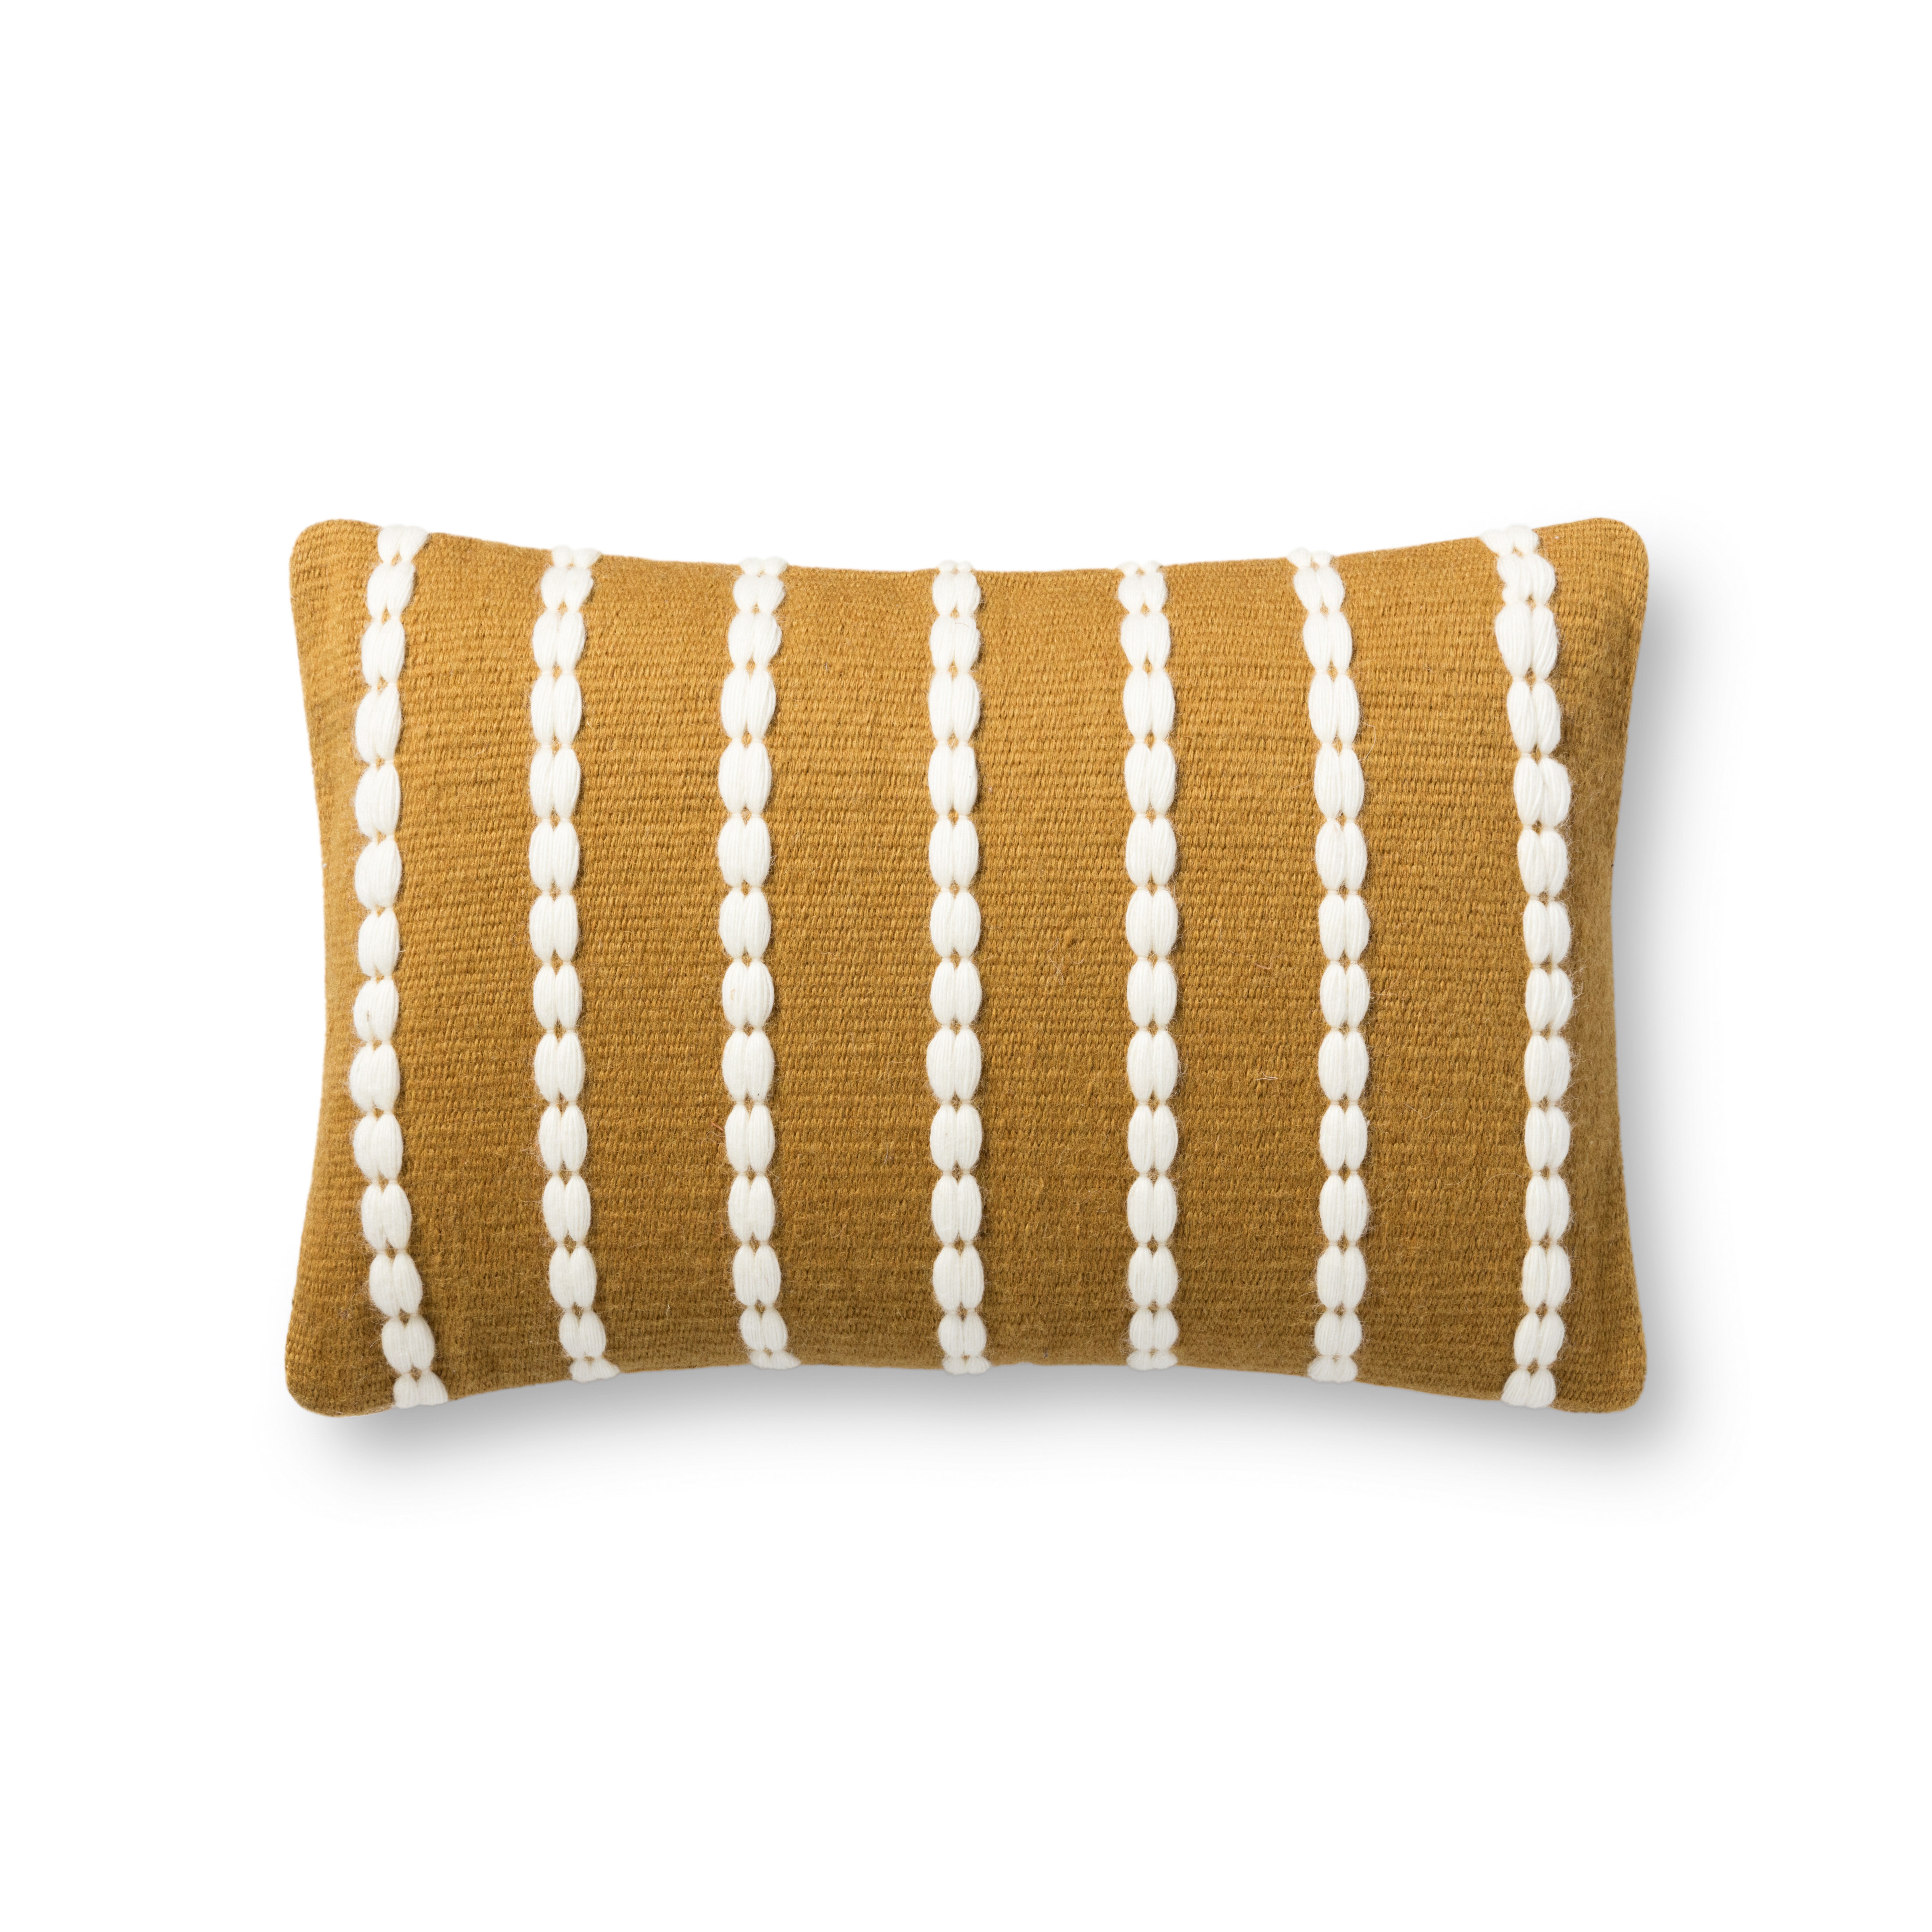 PILLOWS P1152 GOLD / IVORY 13" x 21" Cover w/Poly - Magnolia Home by Joana Gaines Crafted by Loloi Rugs